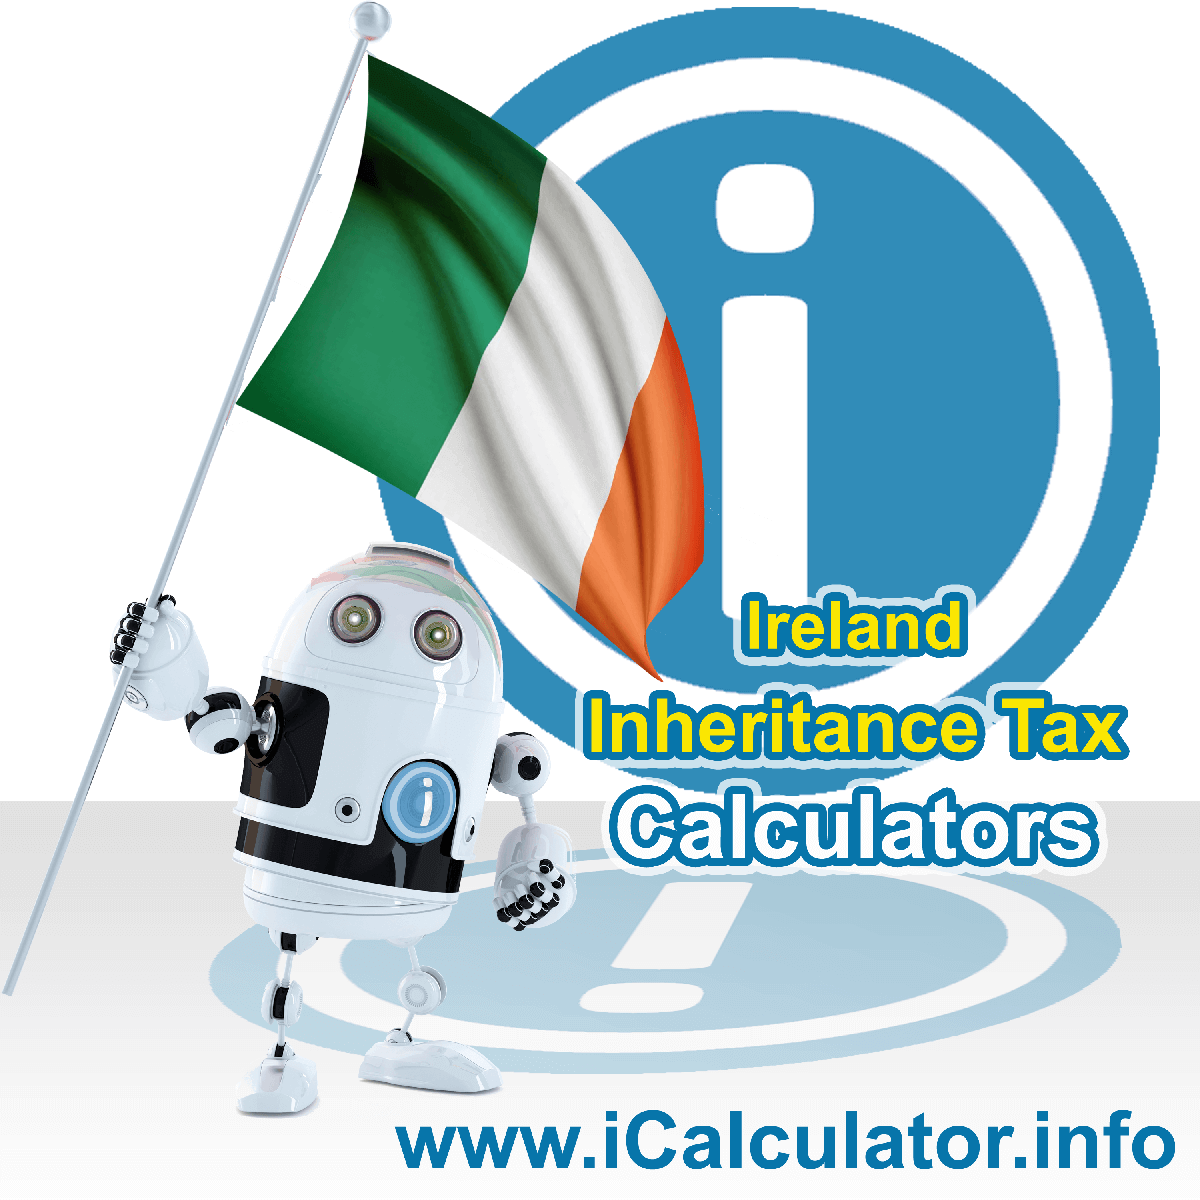 Ireland Inheritance Tax Calculator. This image shows the Ireland flag and information relating to the inheritance tax rate formula used for calculating Inheritance Tax in Ireland using the Ireland Inheritance Tax Calculator in 2023